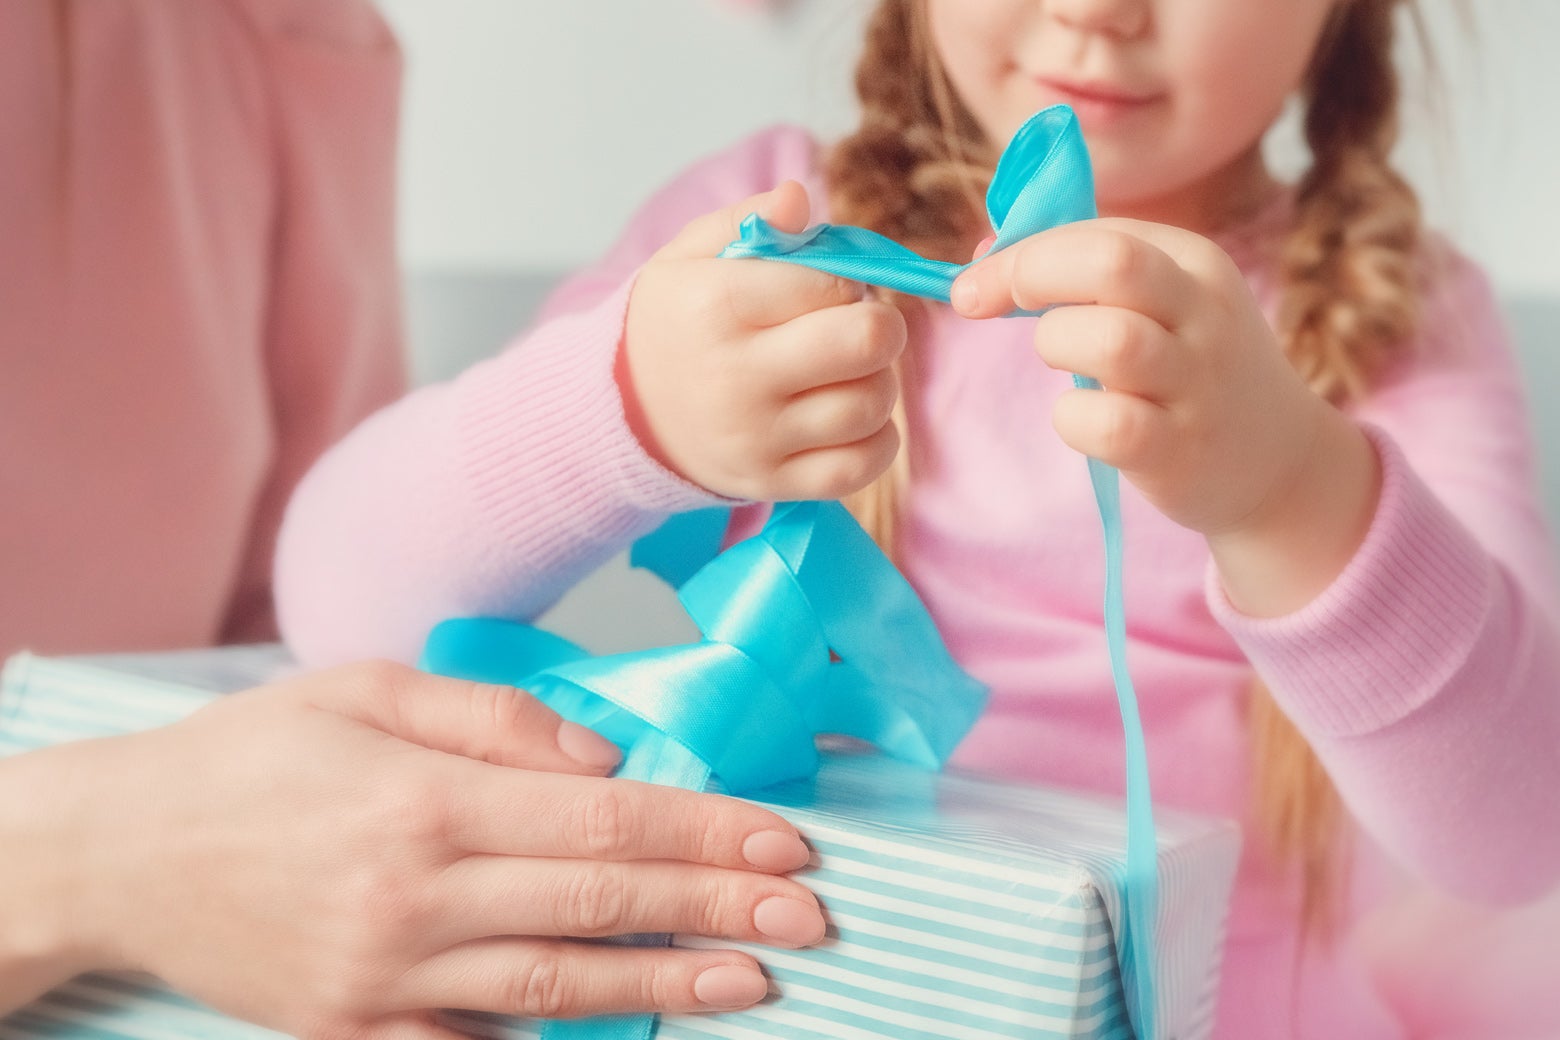 Please Let Me Bring Gifts to Your Kid’s Birthday Party Lucy Huber